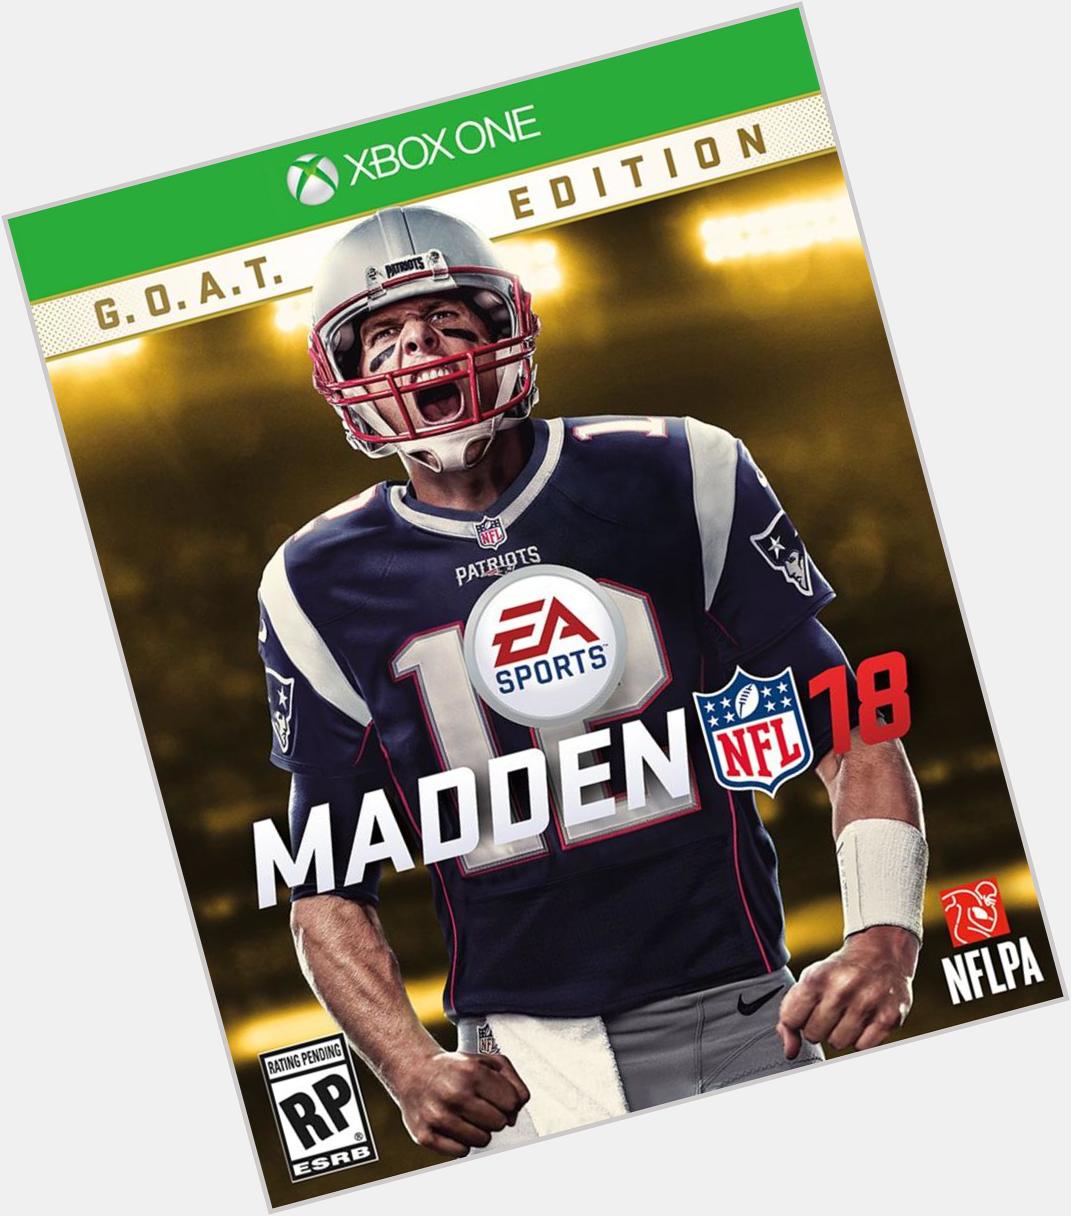 Happy Birthday John Madden! Who is your favorite team to play with in Madden?  